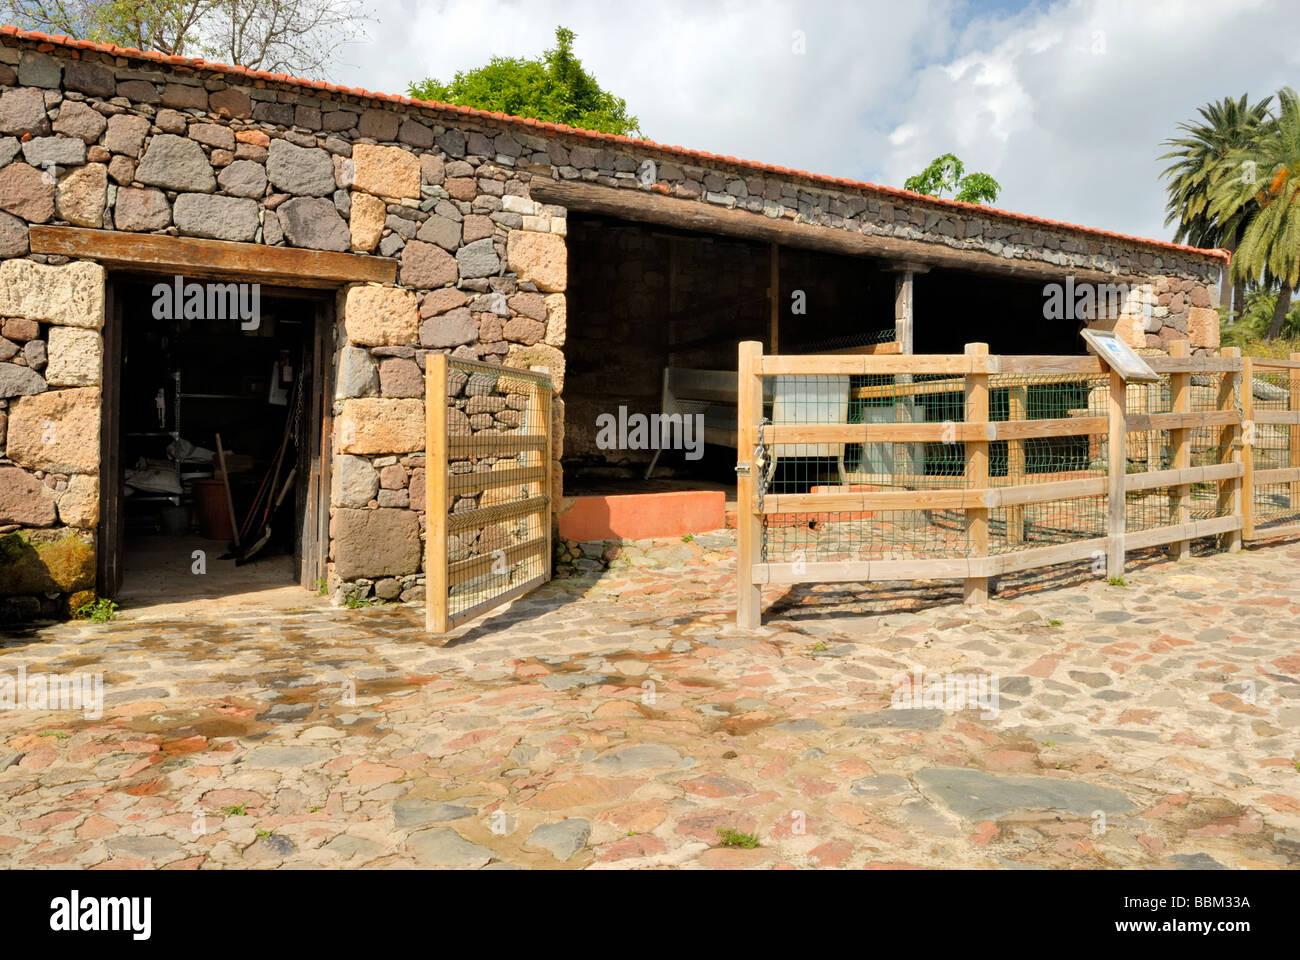 A farm animals shed in the Parque Agricola del Guiniguada, The Guiniguada Agricultural Park. The park has some farm animals and Stock Photo